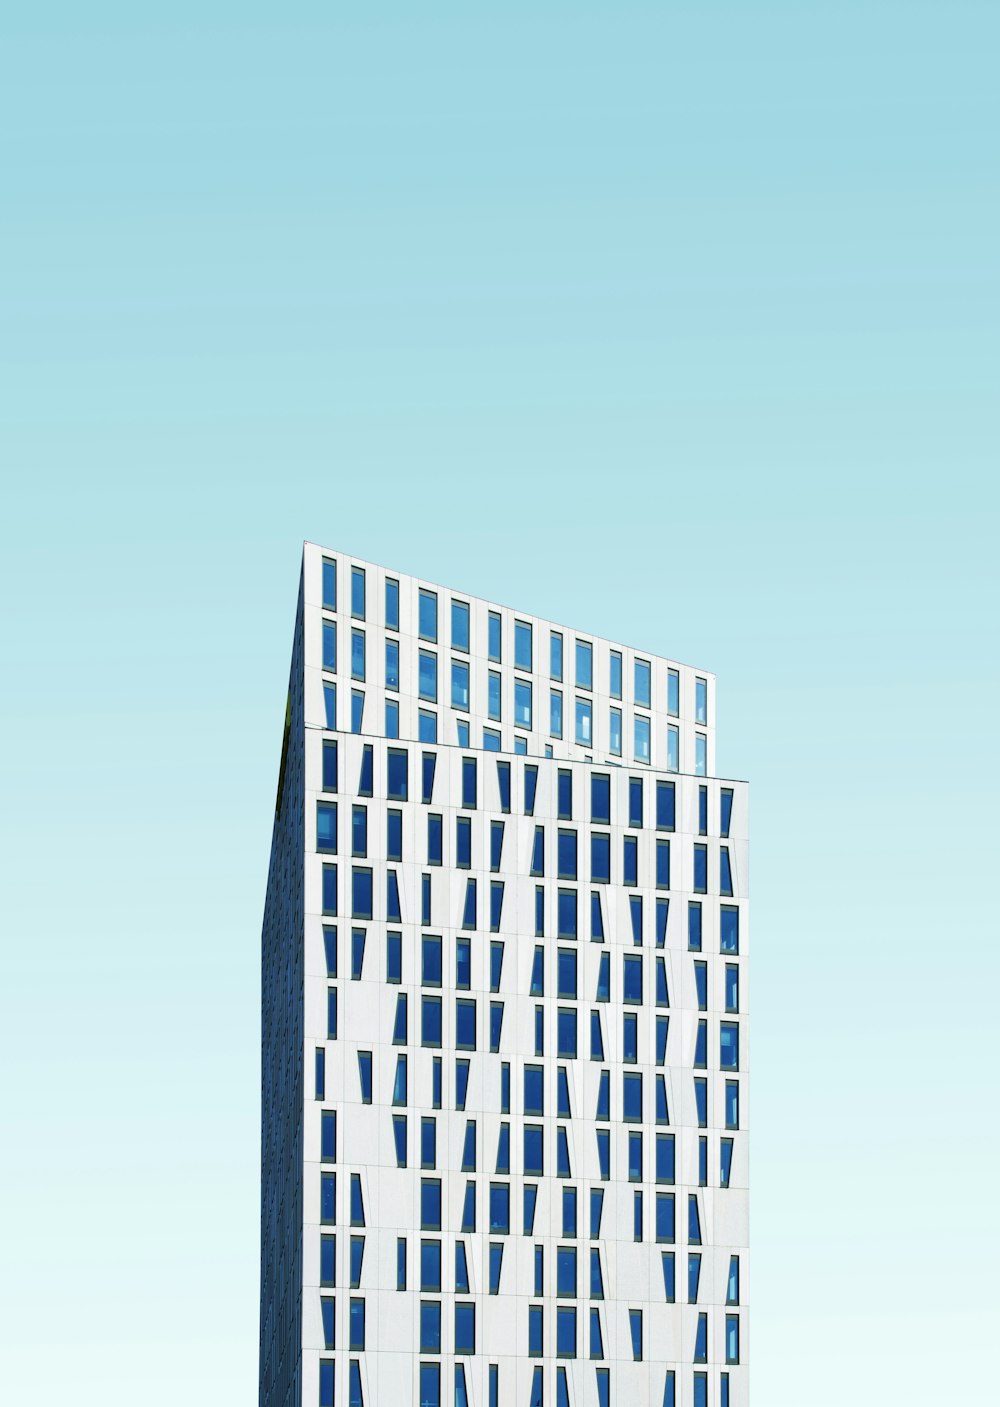 photo of white concrete building under blue sky at daytime